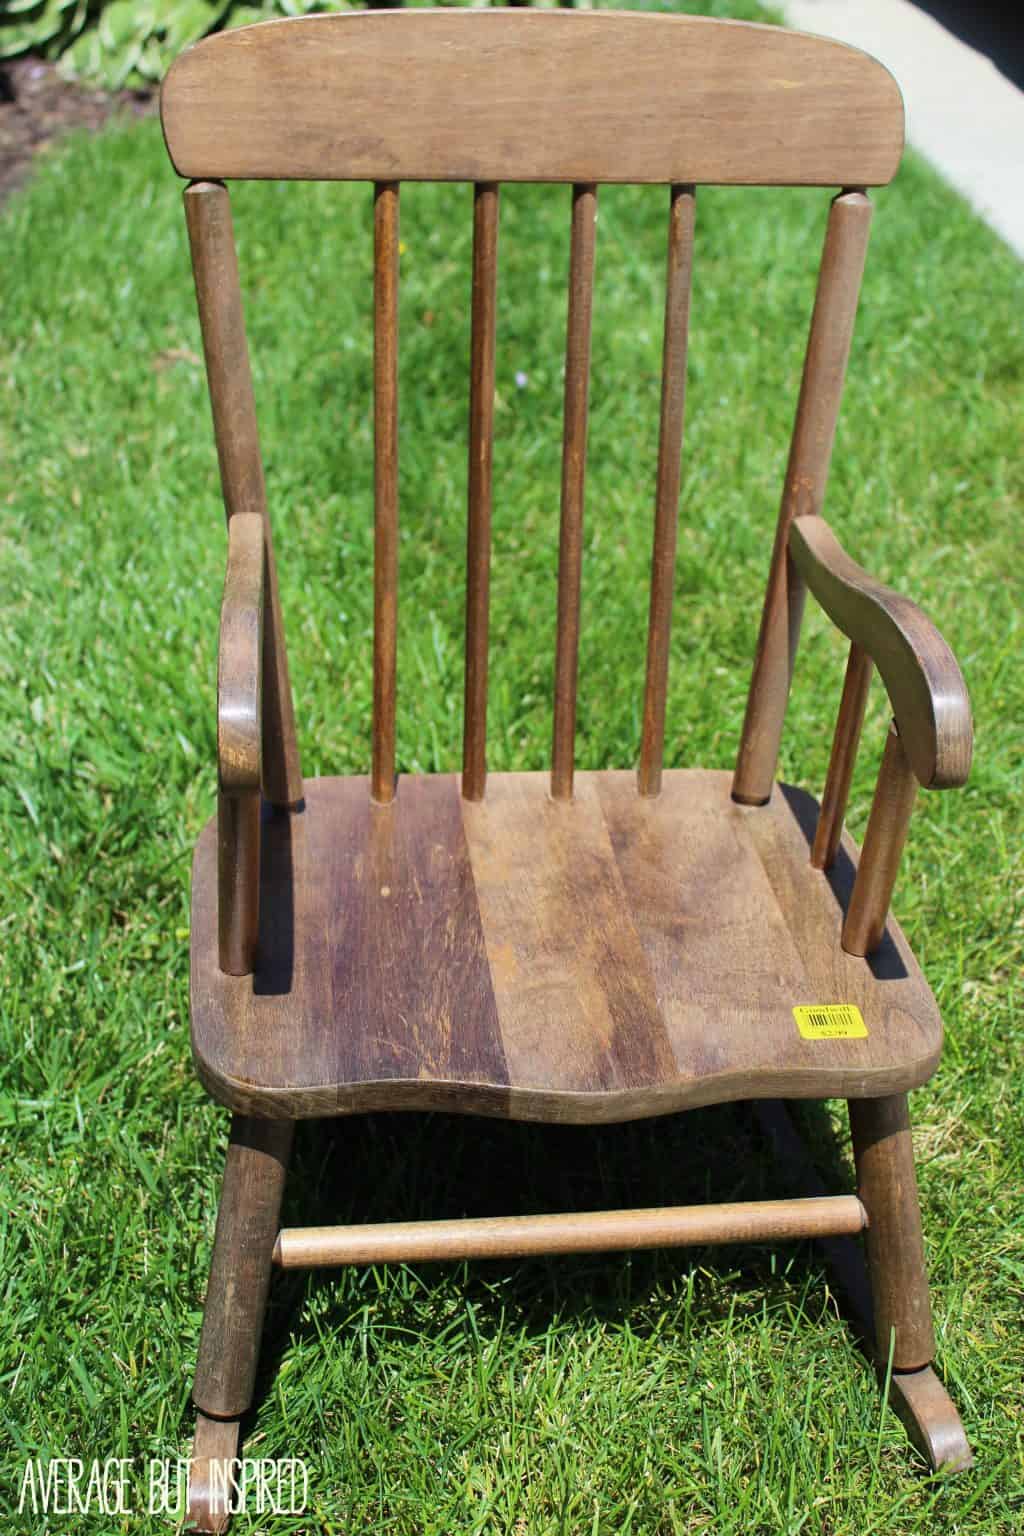 childs rocking chair with name